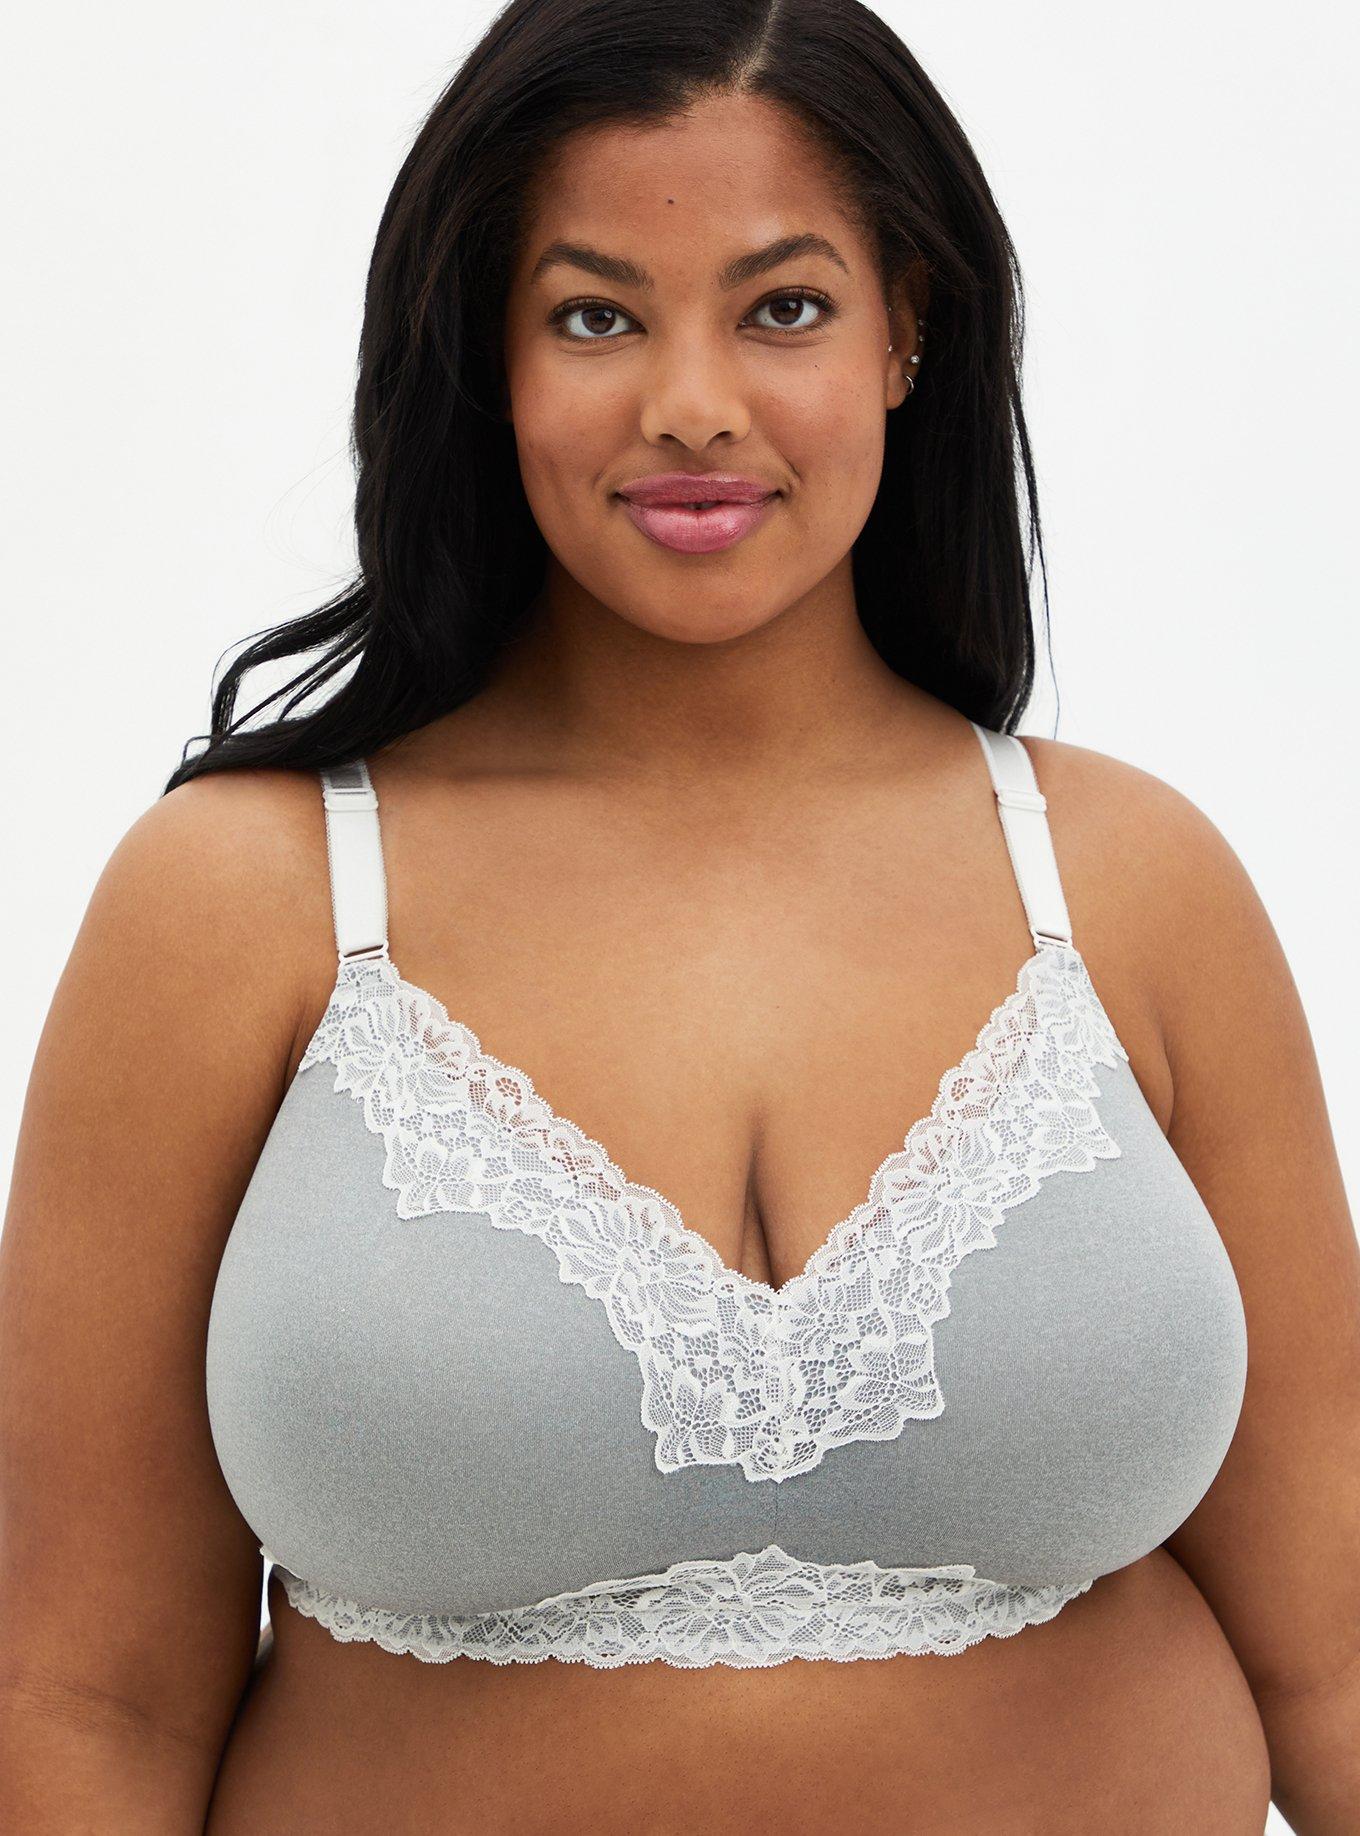 Torrid 2 Tone Gray & Lace Bra 48C With Adjustable Straps That Can